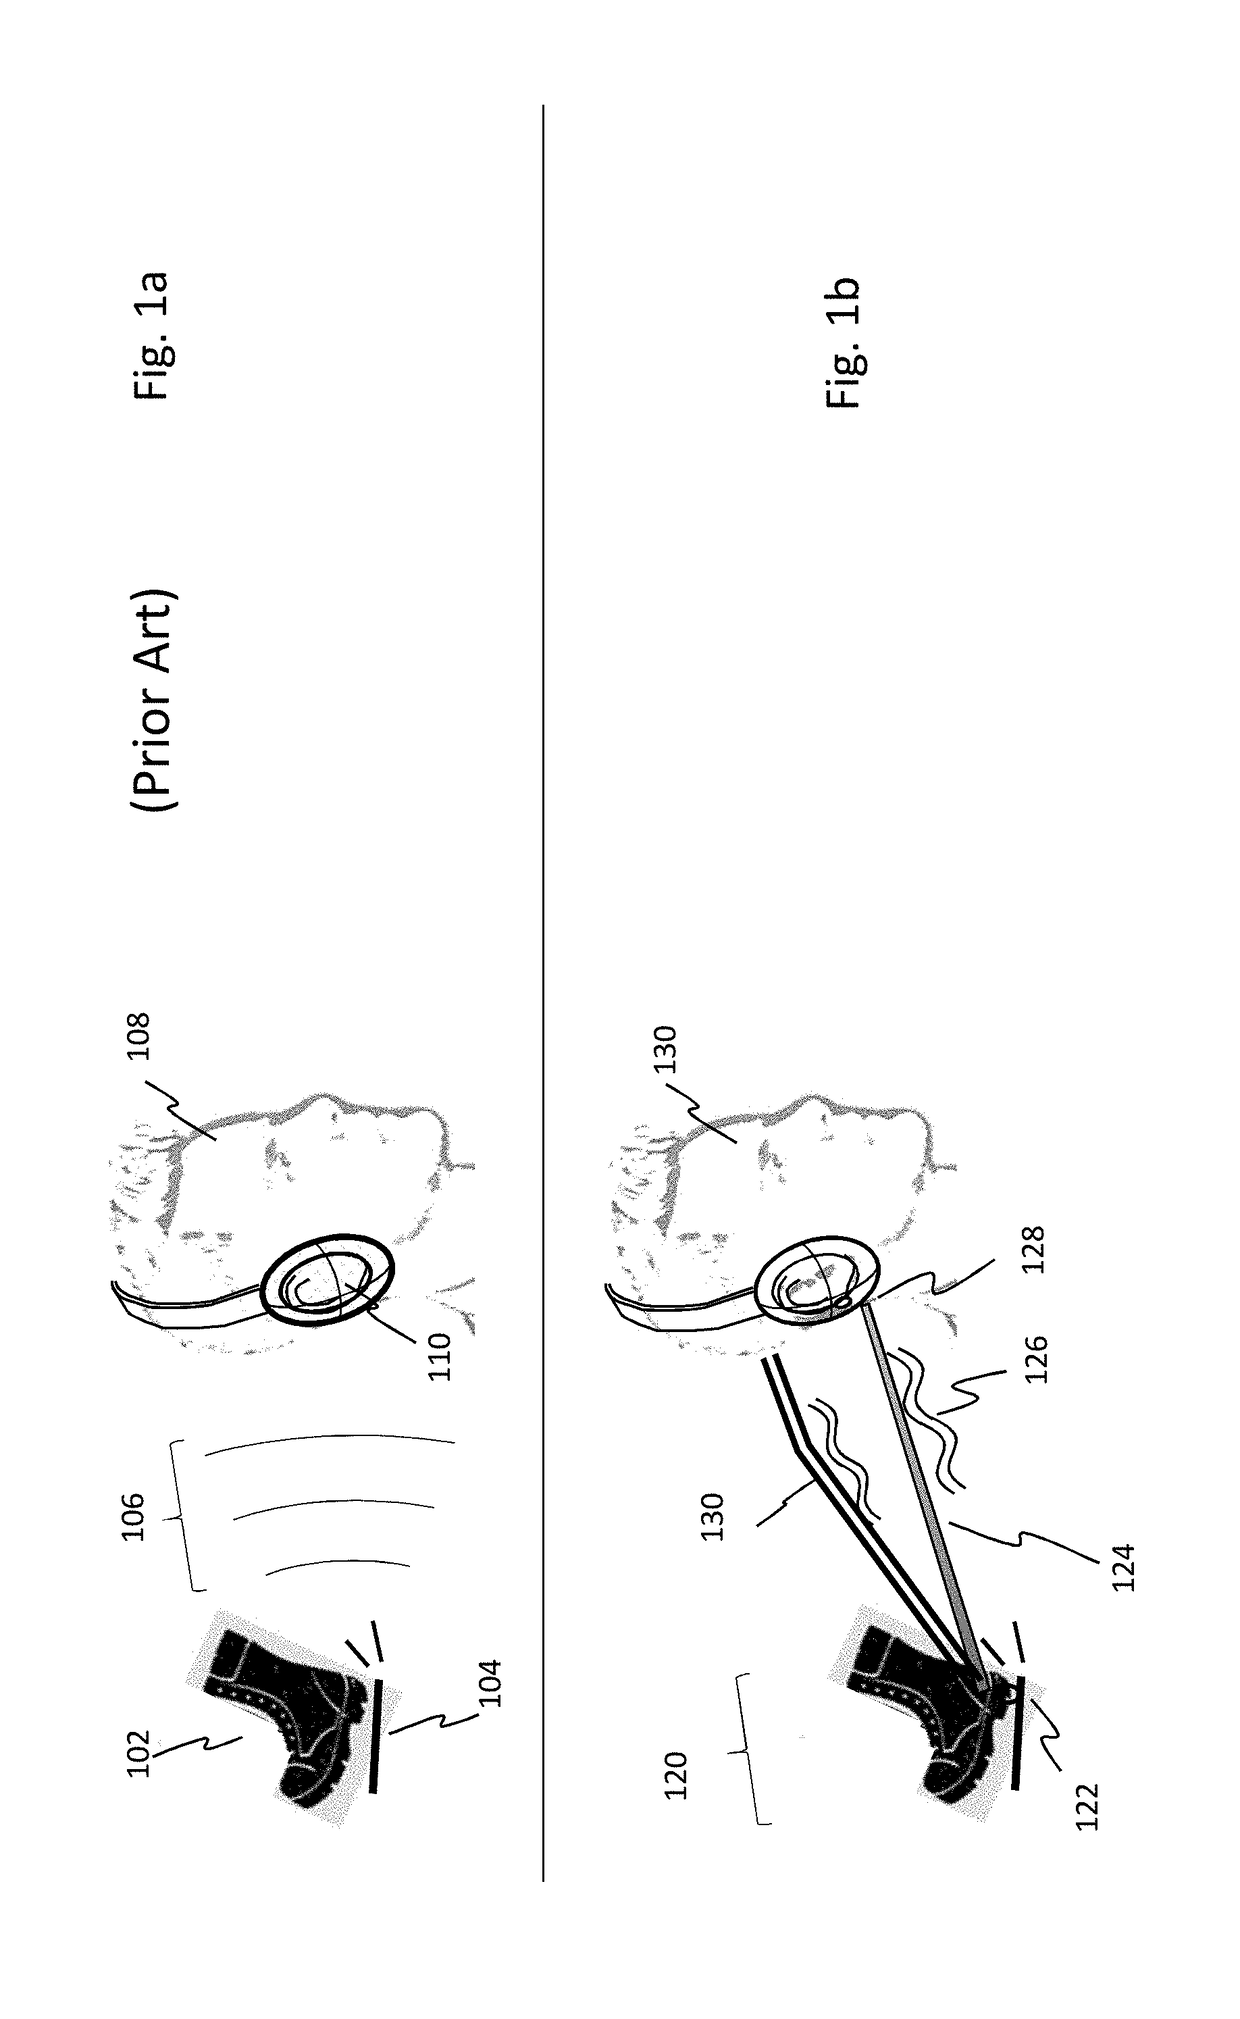 Apparatus and methods for audio-tactile spatialization of sound and perception of bass